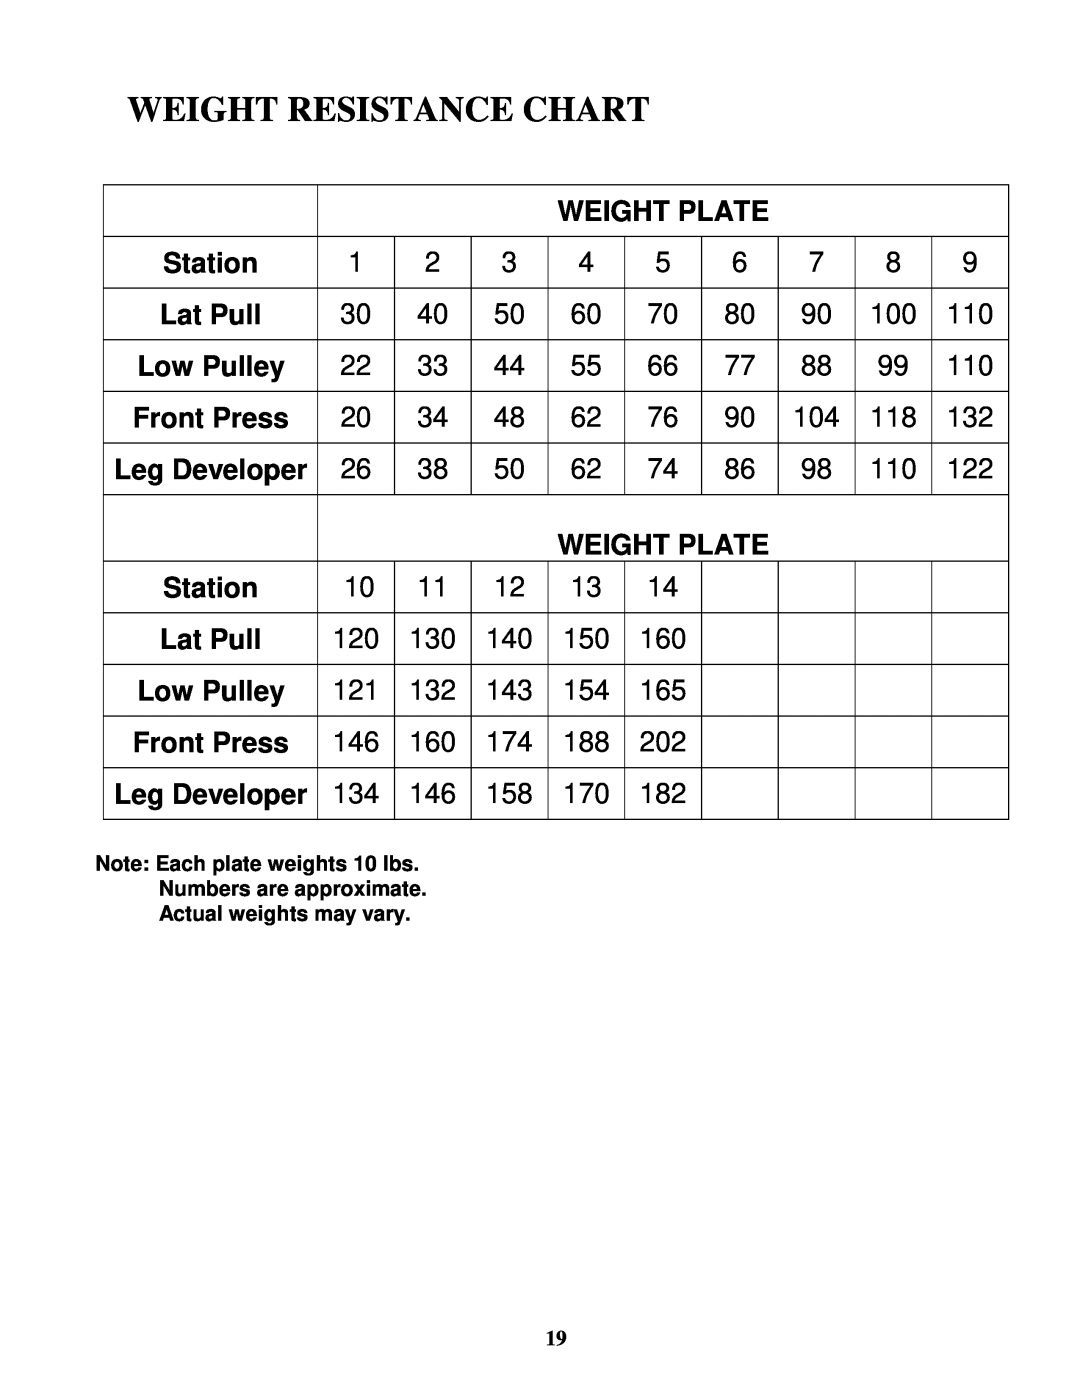 Impex MWM7150 manual Weight Plate, Station, Lat Pull, Low Pulley, Front Press, Weight Resistance Chart 